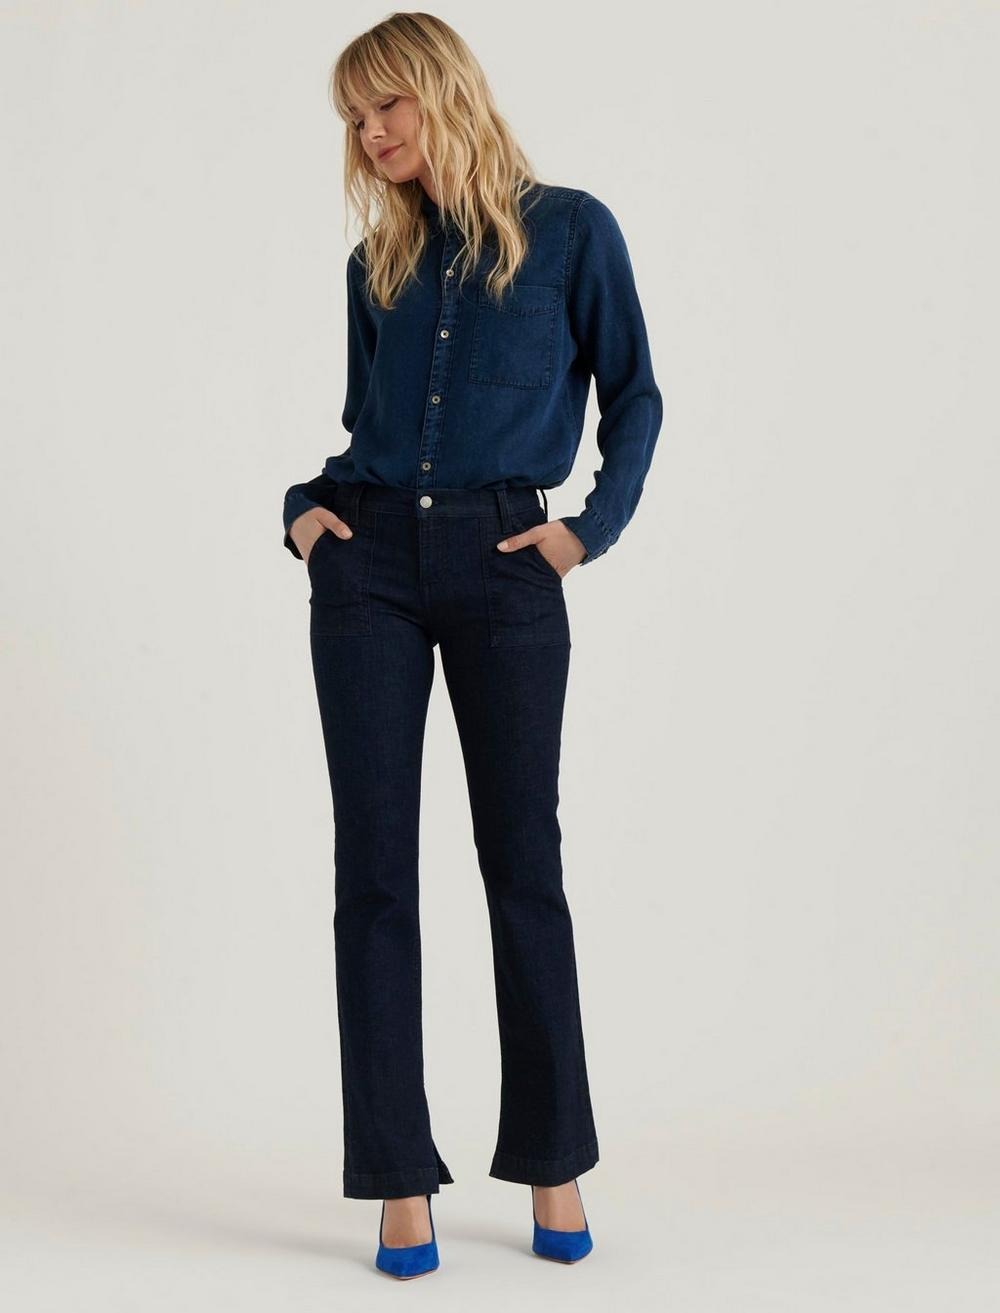 Lucky Brand: Women's Mid Rise Ava Boot Jean $10.50, Mixed Media Top $4.55 & More + FS on $75+